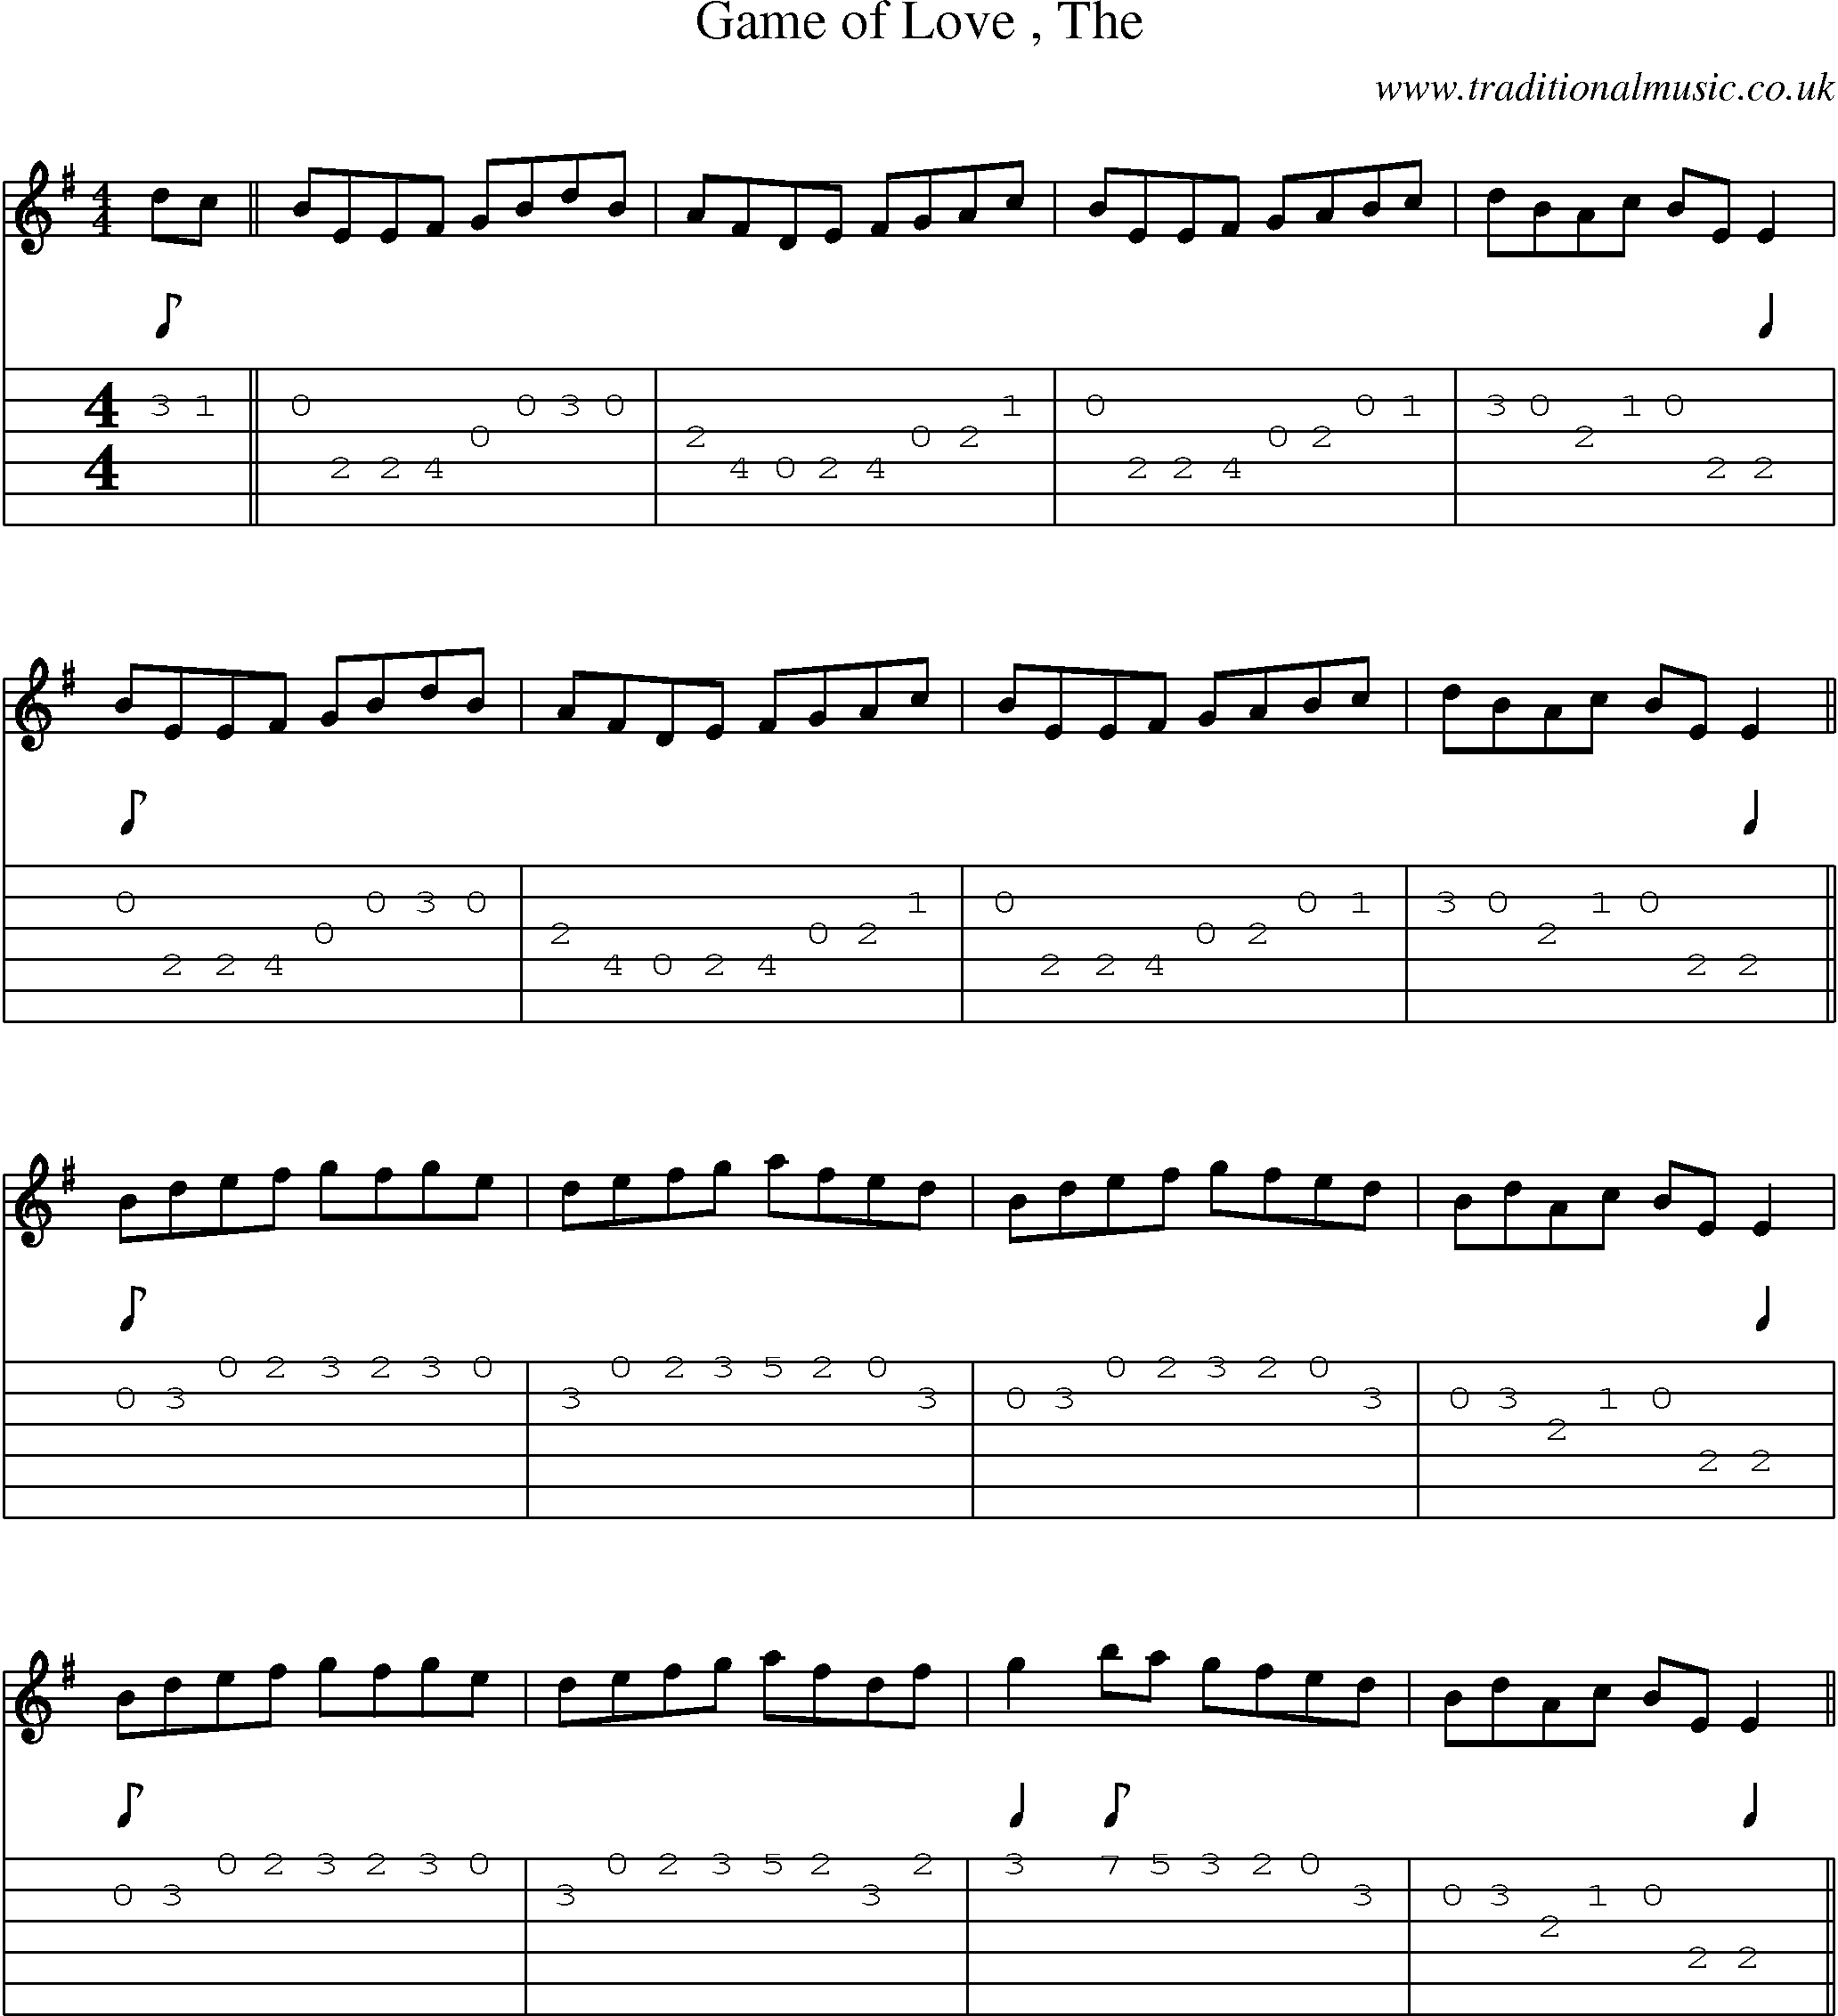 Music Score and Guitar Tabs for Game Of Love